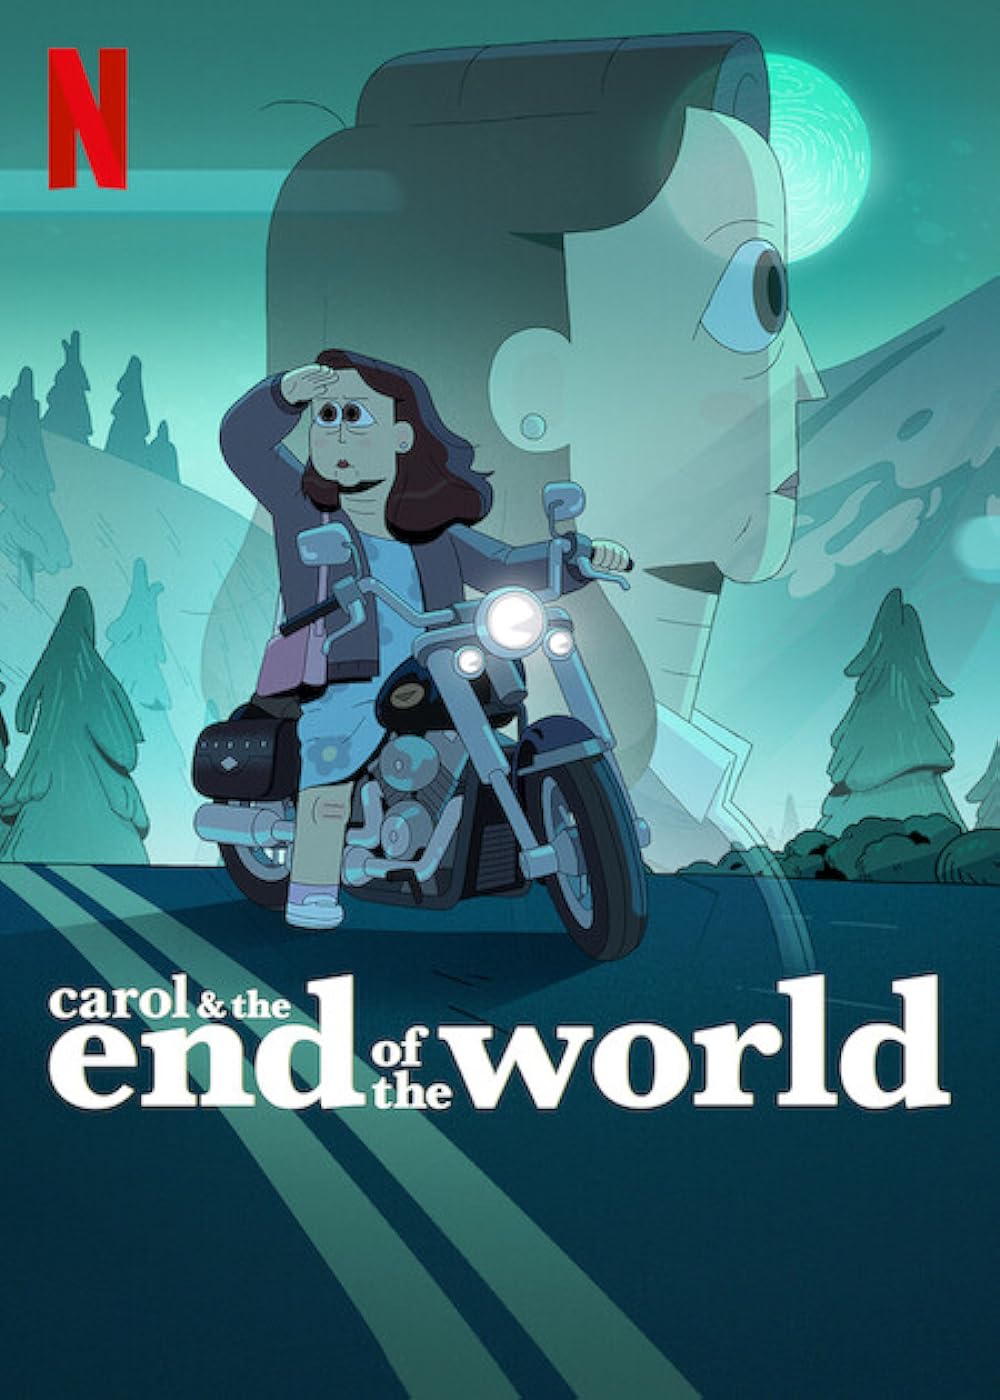 Carol & the End of the World (December 15) - Streaming on Netflix